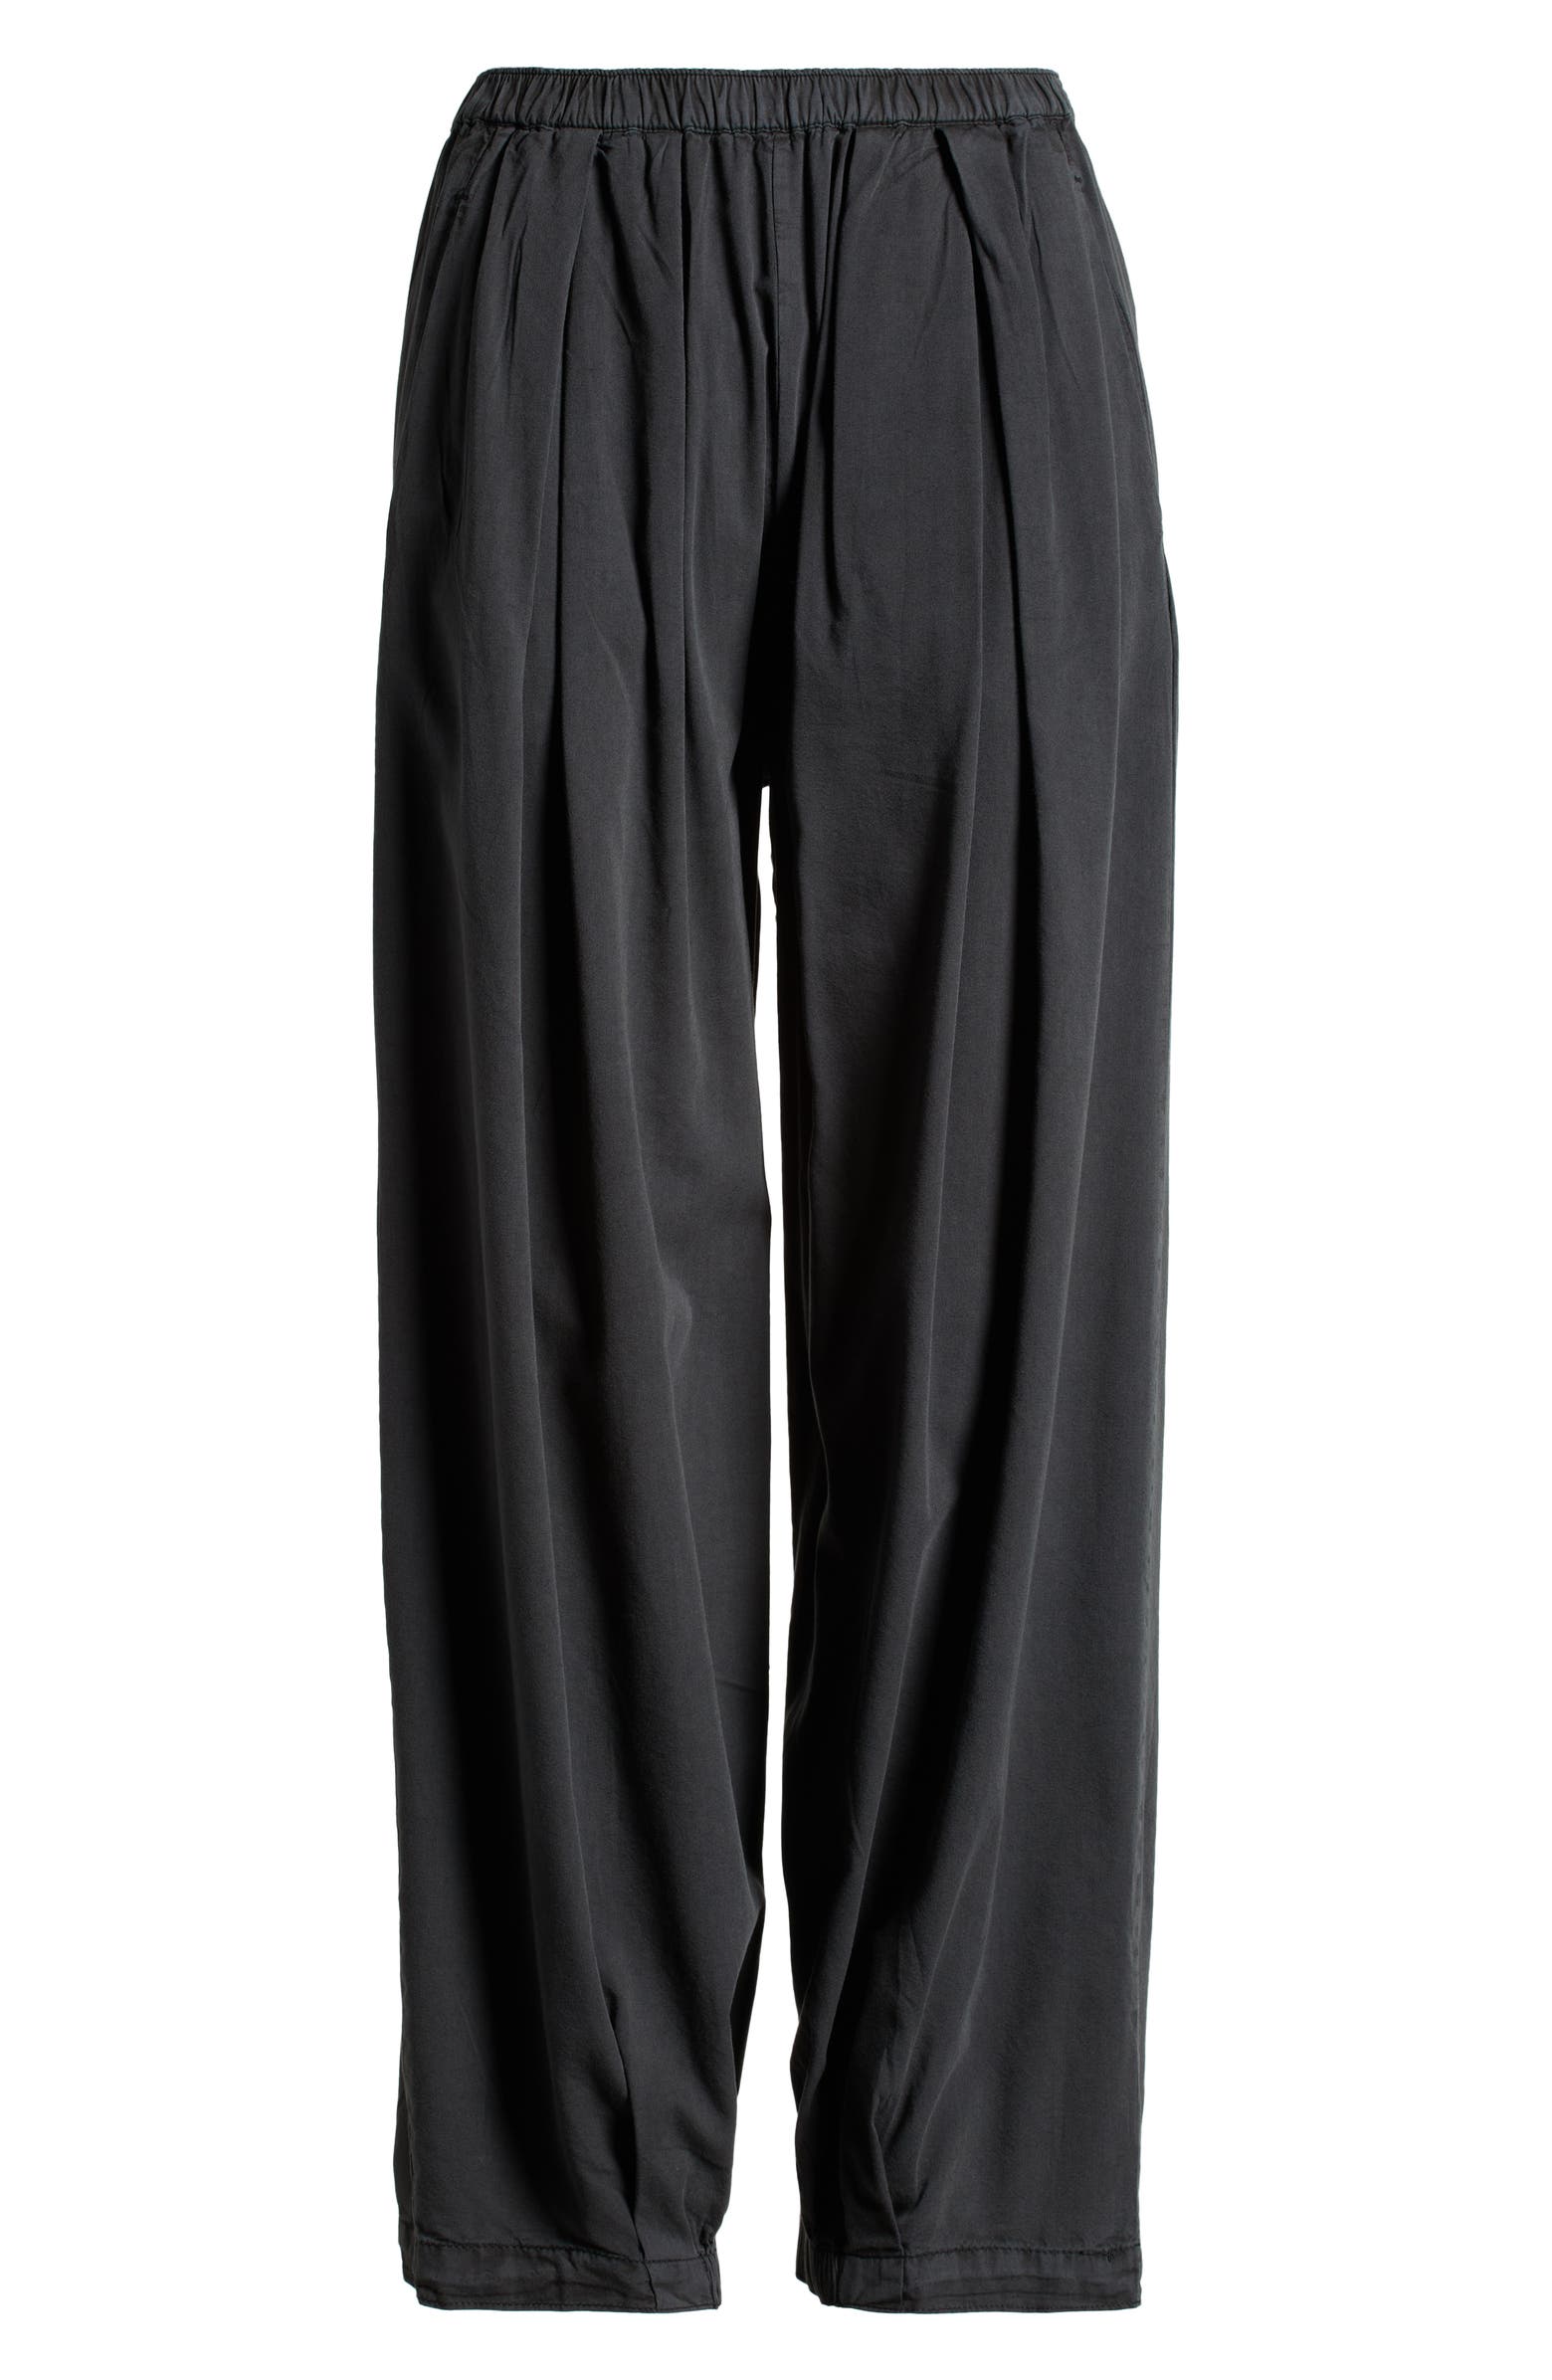 Free People To the Sky Parachute Pants | Nordstrom